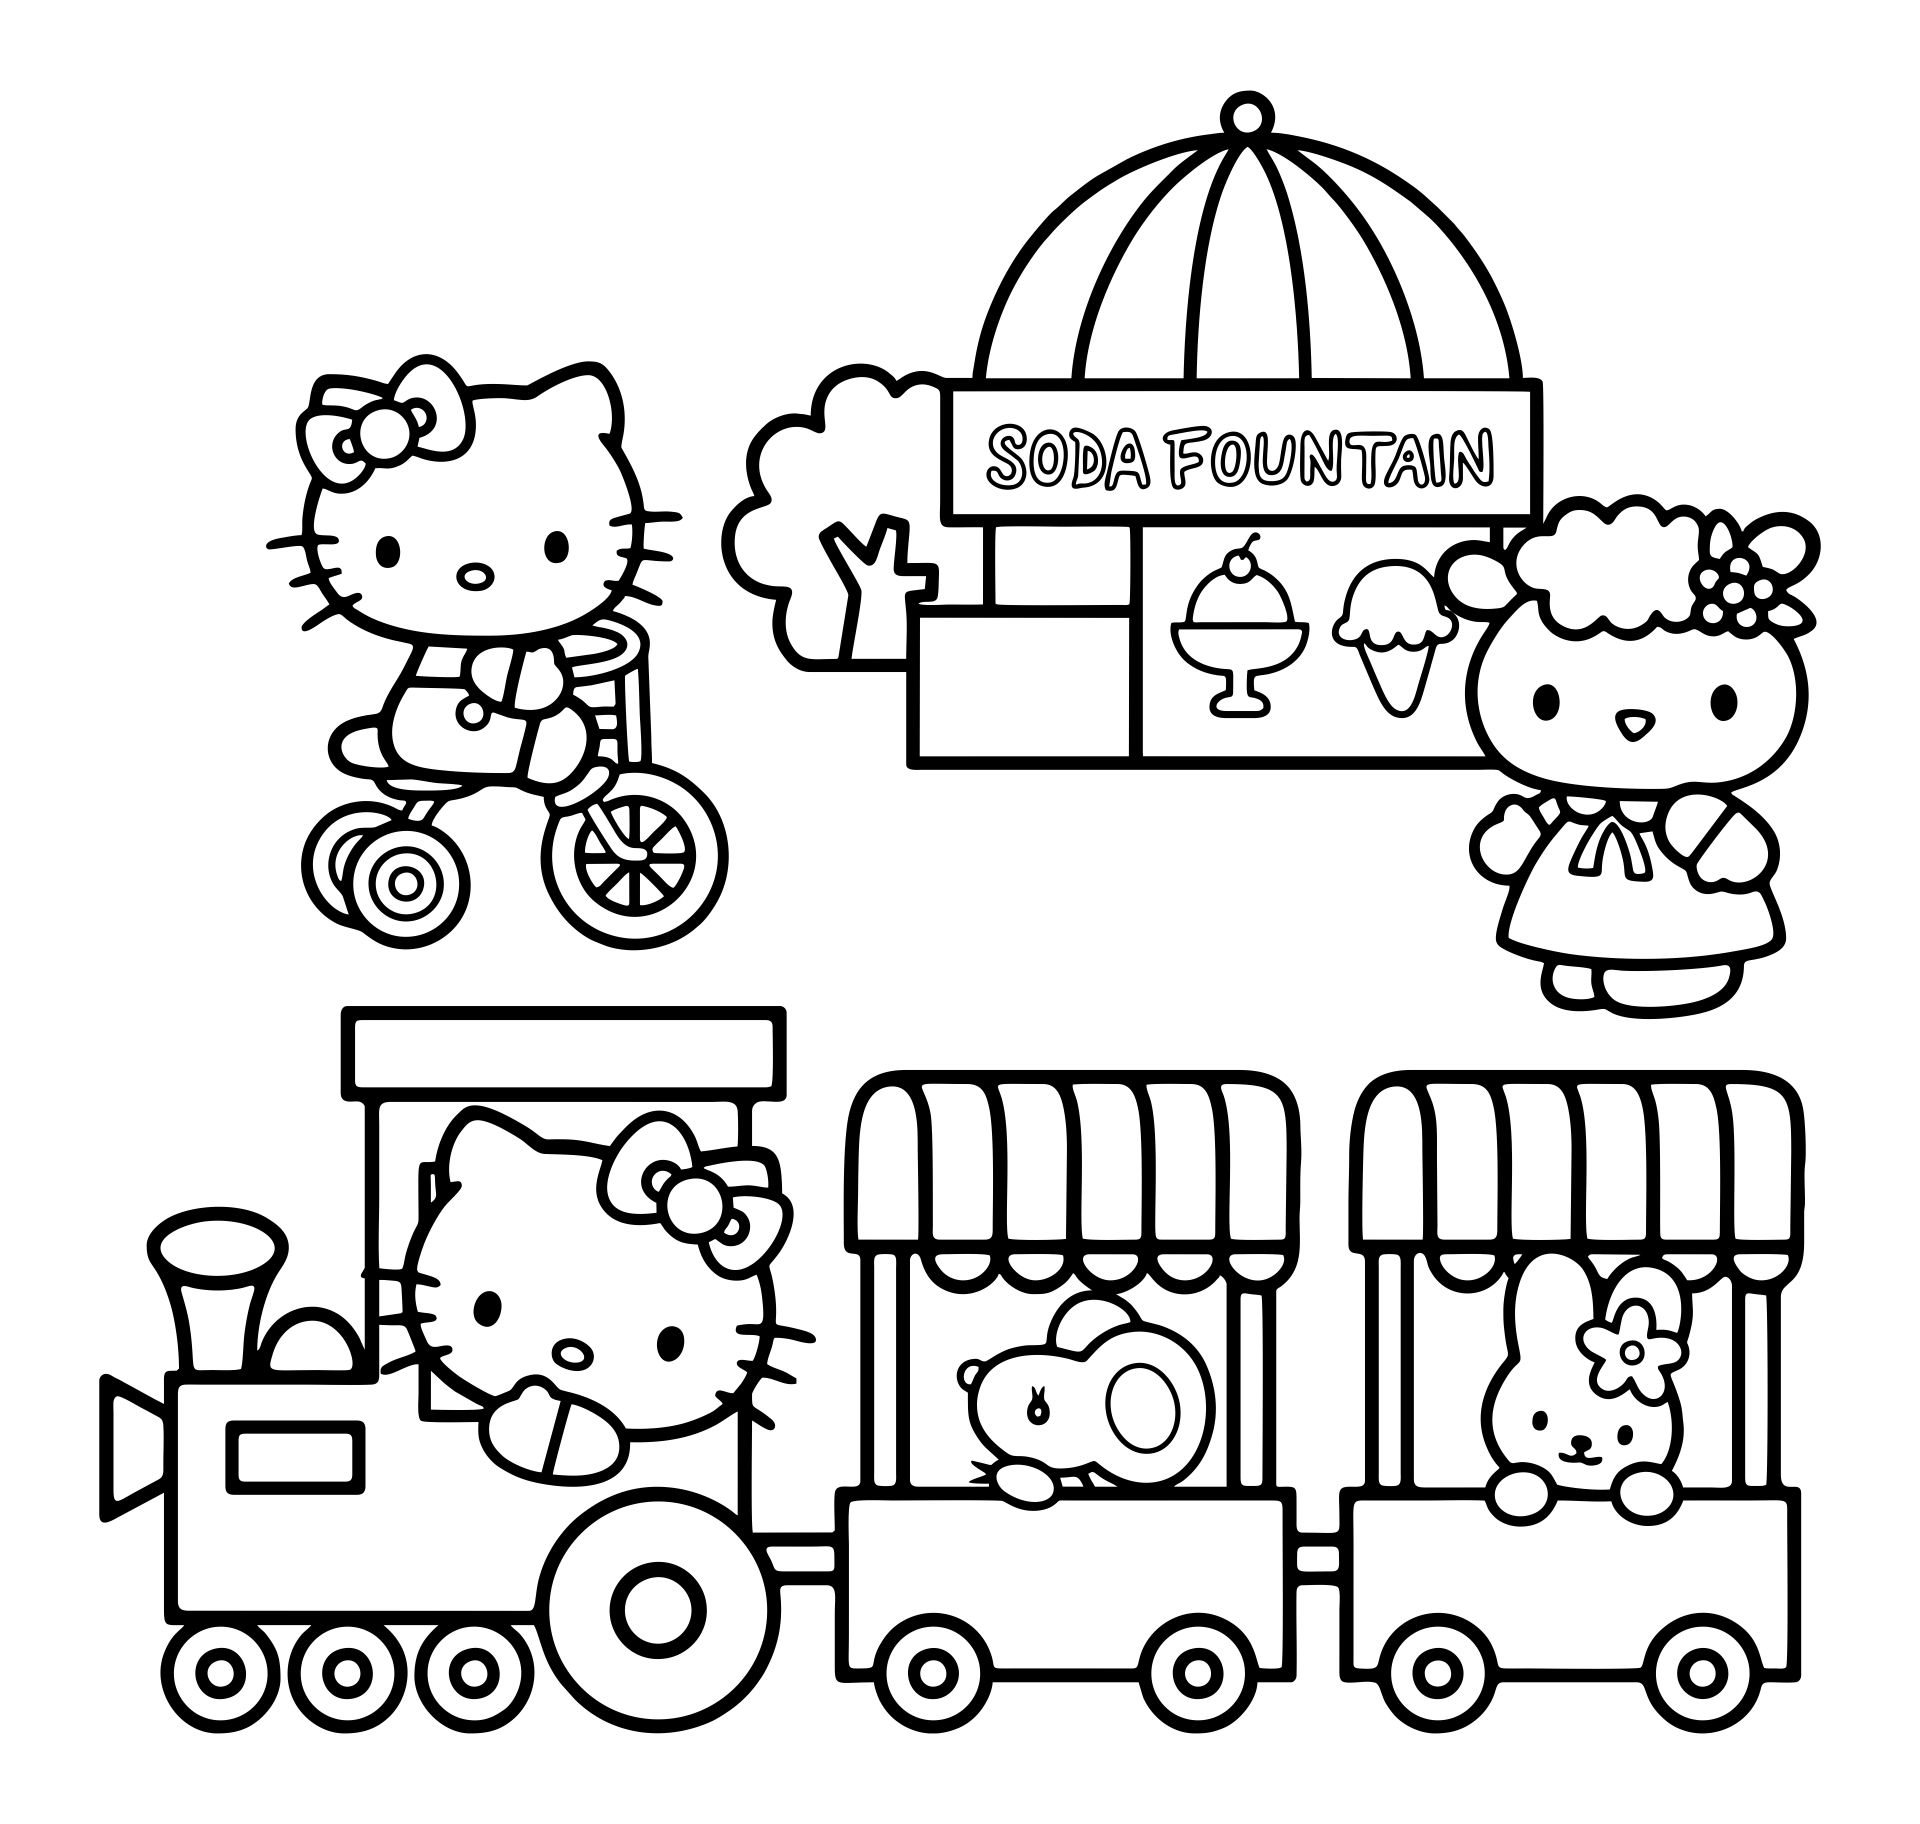 37-christmas-hello-kitty-coloring-pages-brainmckauley